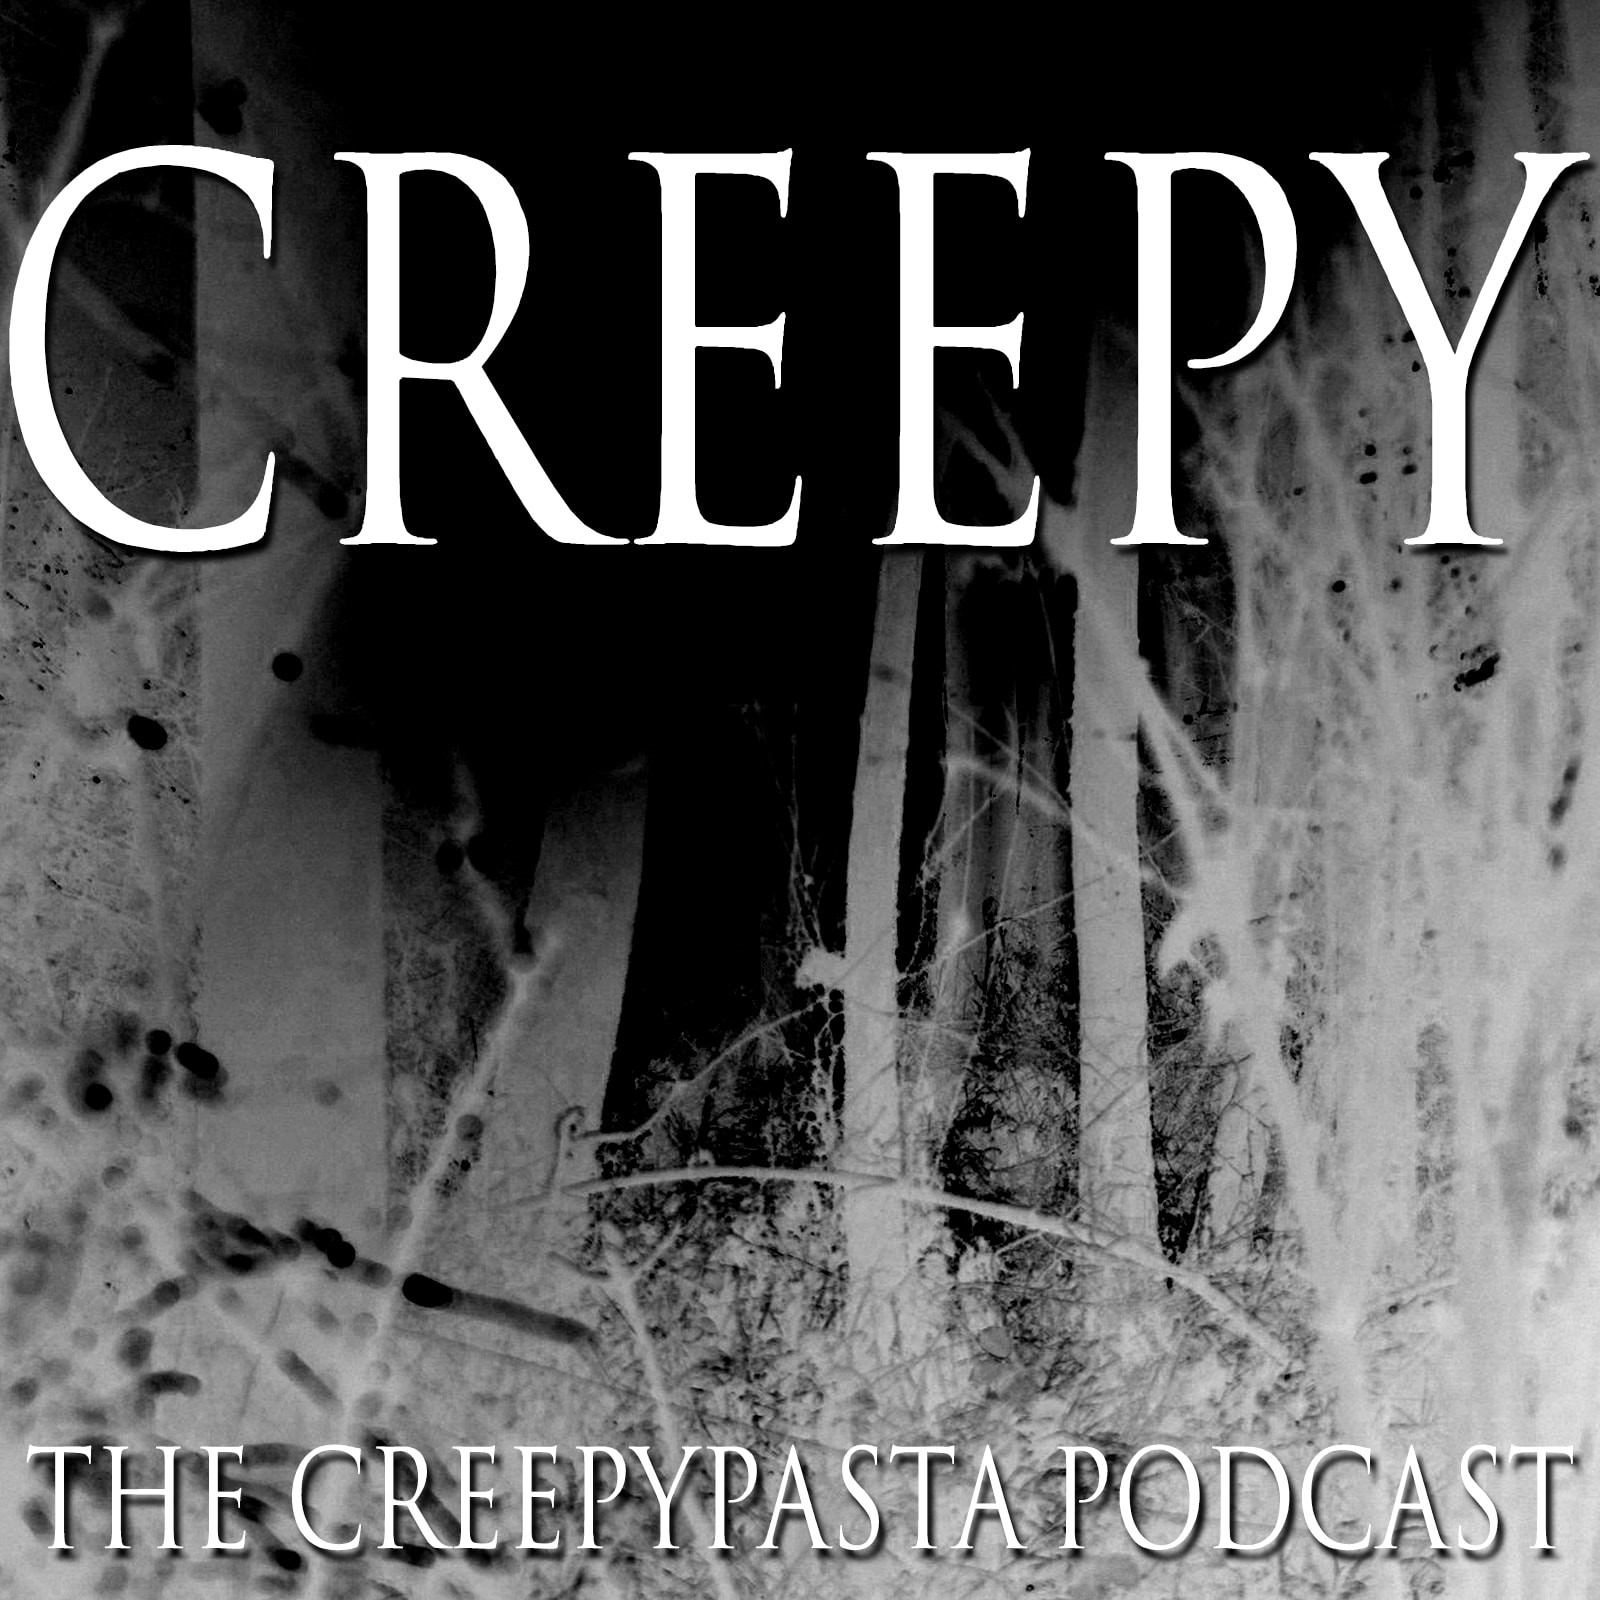 podcast of the week creepy